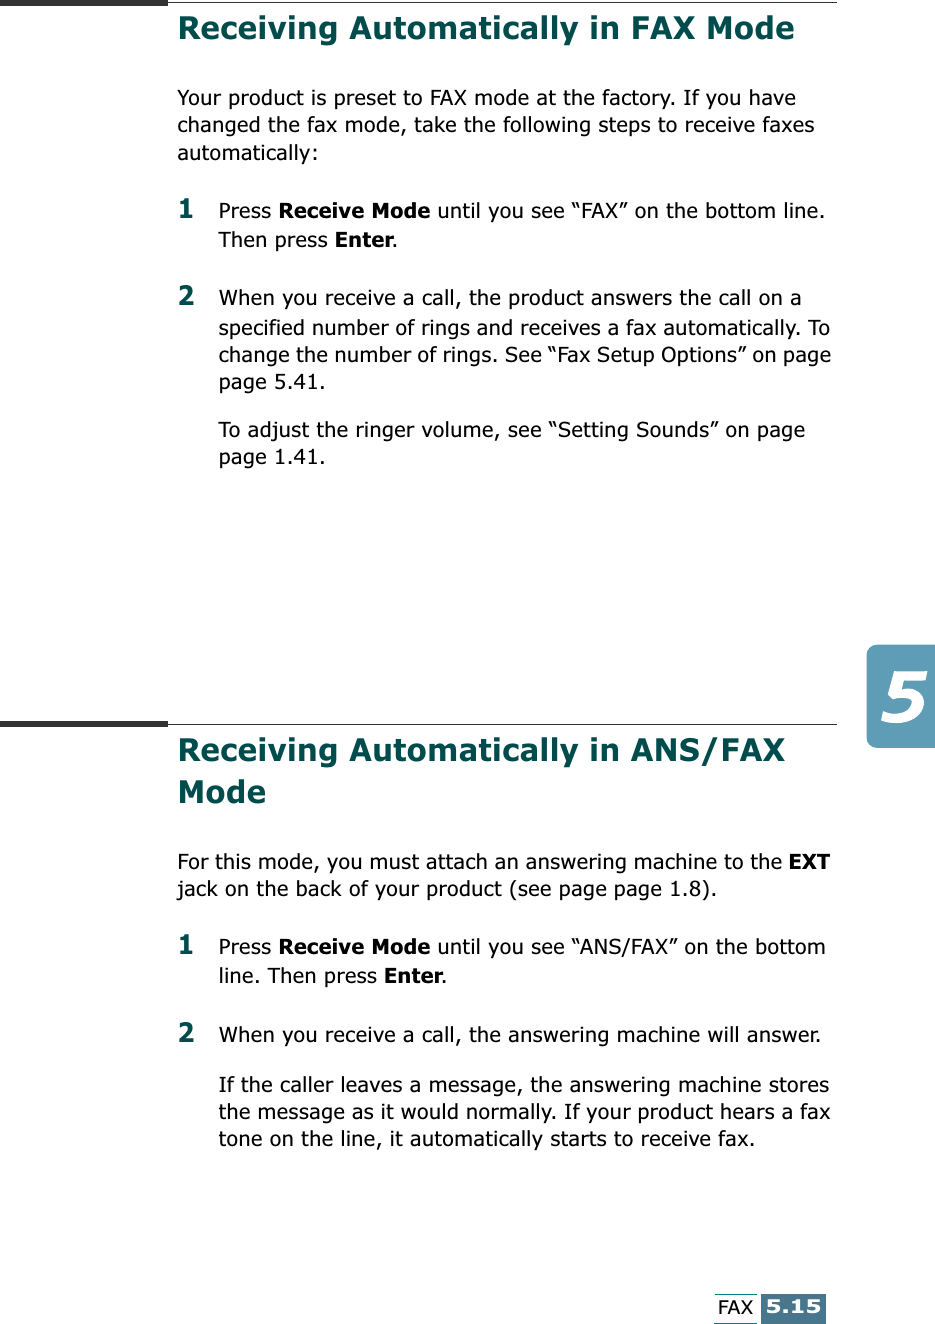 5.15FAXReceiving Automatically in FAX Mode Your product is preset to FAX mode at the factory. If you have changed the fax mode, take the following steps to receive faxes automatically:1Press Receive Mode until you see “FAX” on the bottom line. Then press Enter.2When you receive a call, the product answers the call on a specified number of rings and receives a fax automatically. To change the number of rings. See “Fax Setup Options” on page page 5.41.To adjust the ringer volume, see “Setting Sounds” on page page 1.41.Receiving Automatically in ANS/FAX Mode For this mode, you must attach an answering machine to the EXT jack on the back of your product (see page page 1.8). 1Press Receive Mode until you see “ANS/FAX” on the bottom line. Then press Enter.2When you receive a call, the answering machine will answer. If the caller leaves a message, the answering machine stores the message as it would normally. If your product hears a fax tone on the line, it automatically starts to receive fax.